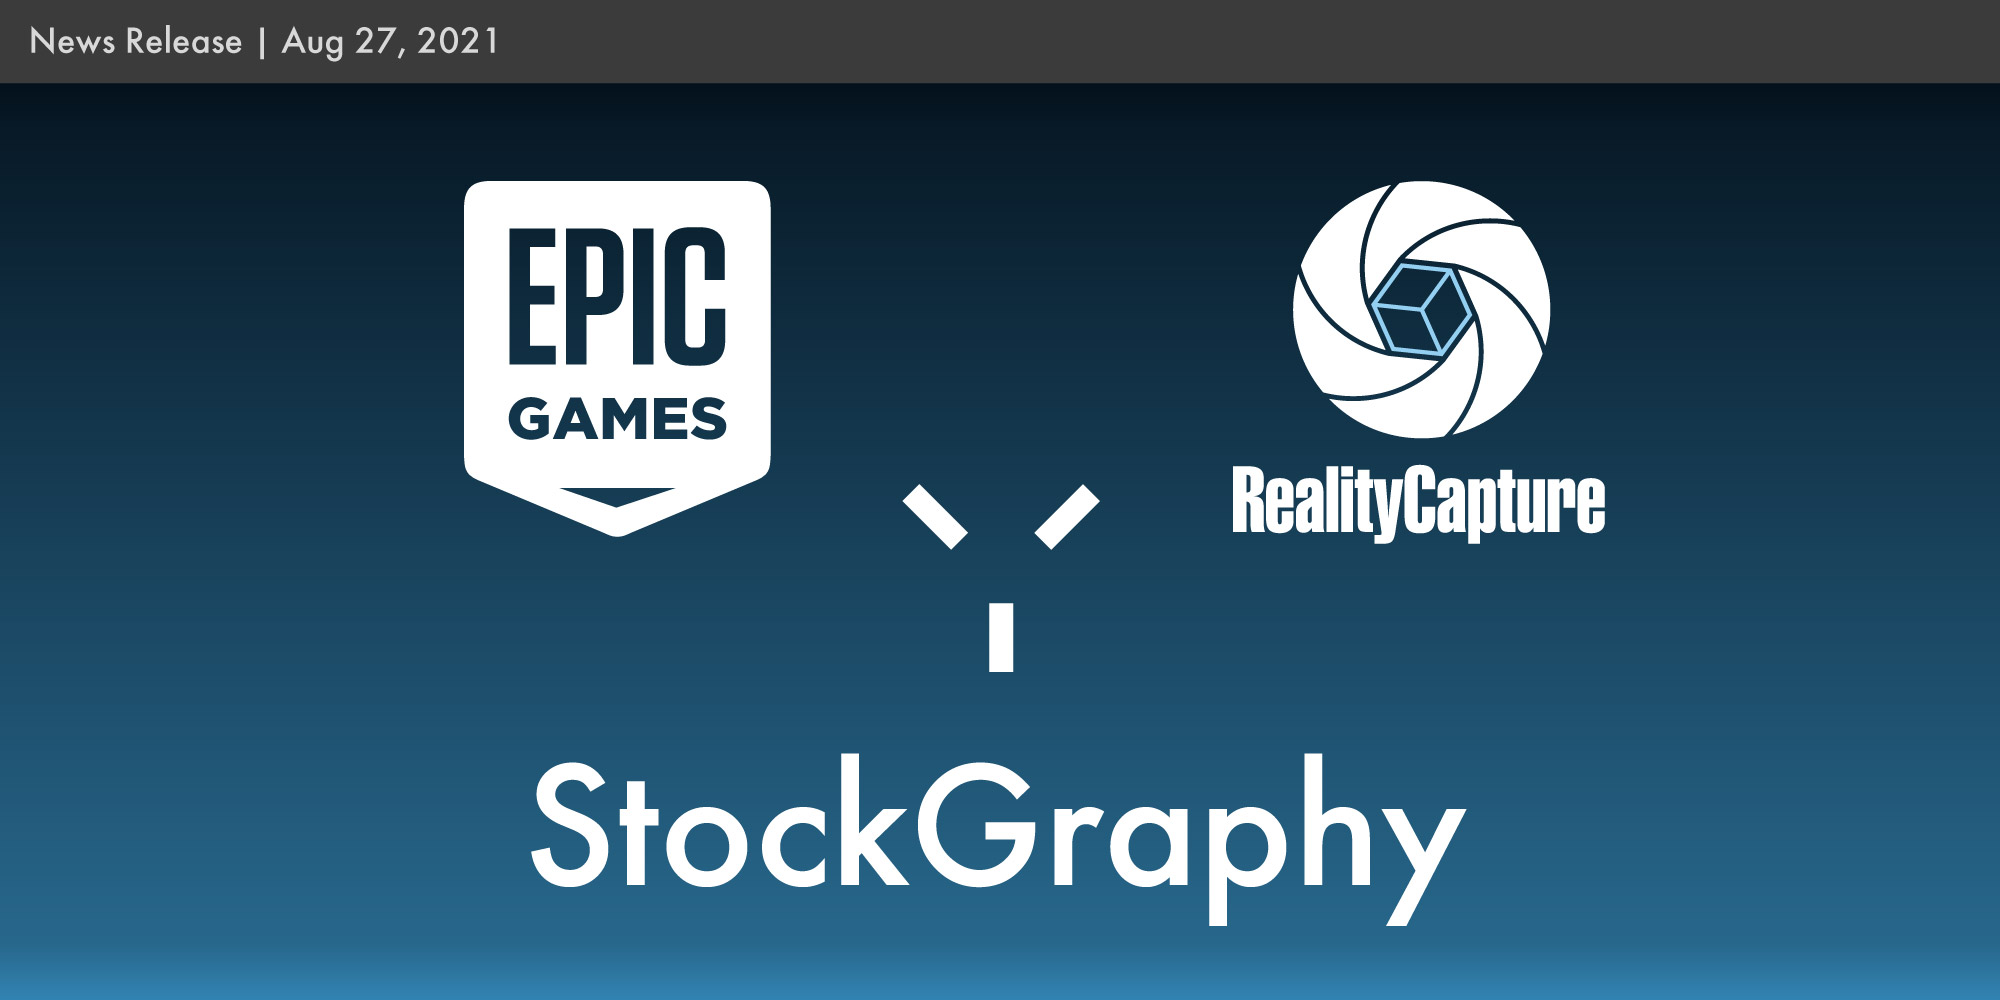 StockGraphy and Epic Games conclude reseller agreement of RealityCapture. BEGIN3D will be launched.